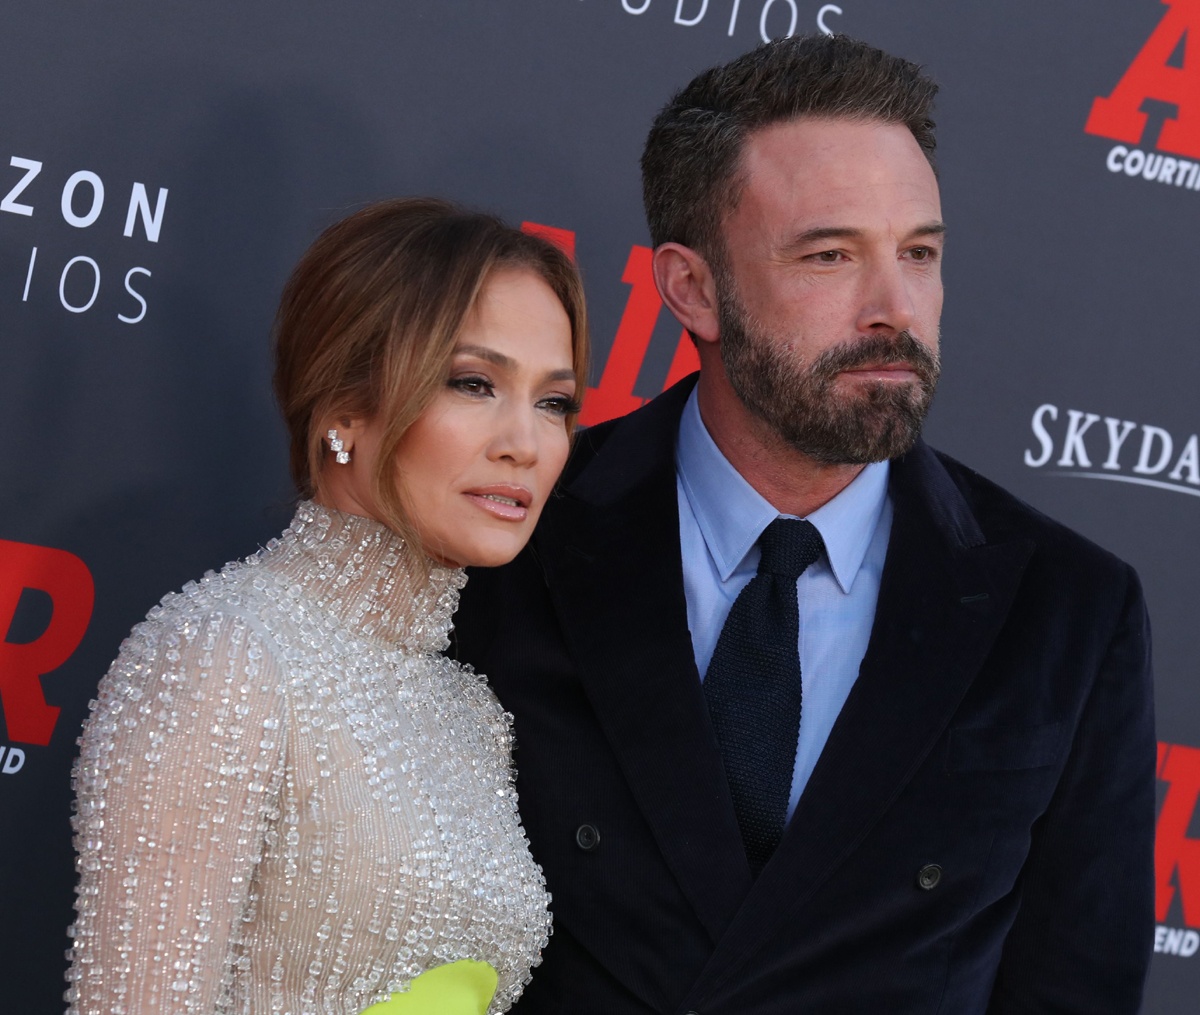 Ben Affleck and Jennifer Lopez at the premiere of 